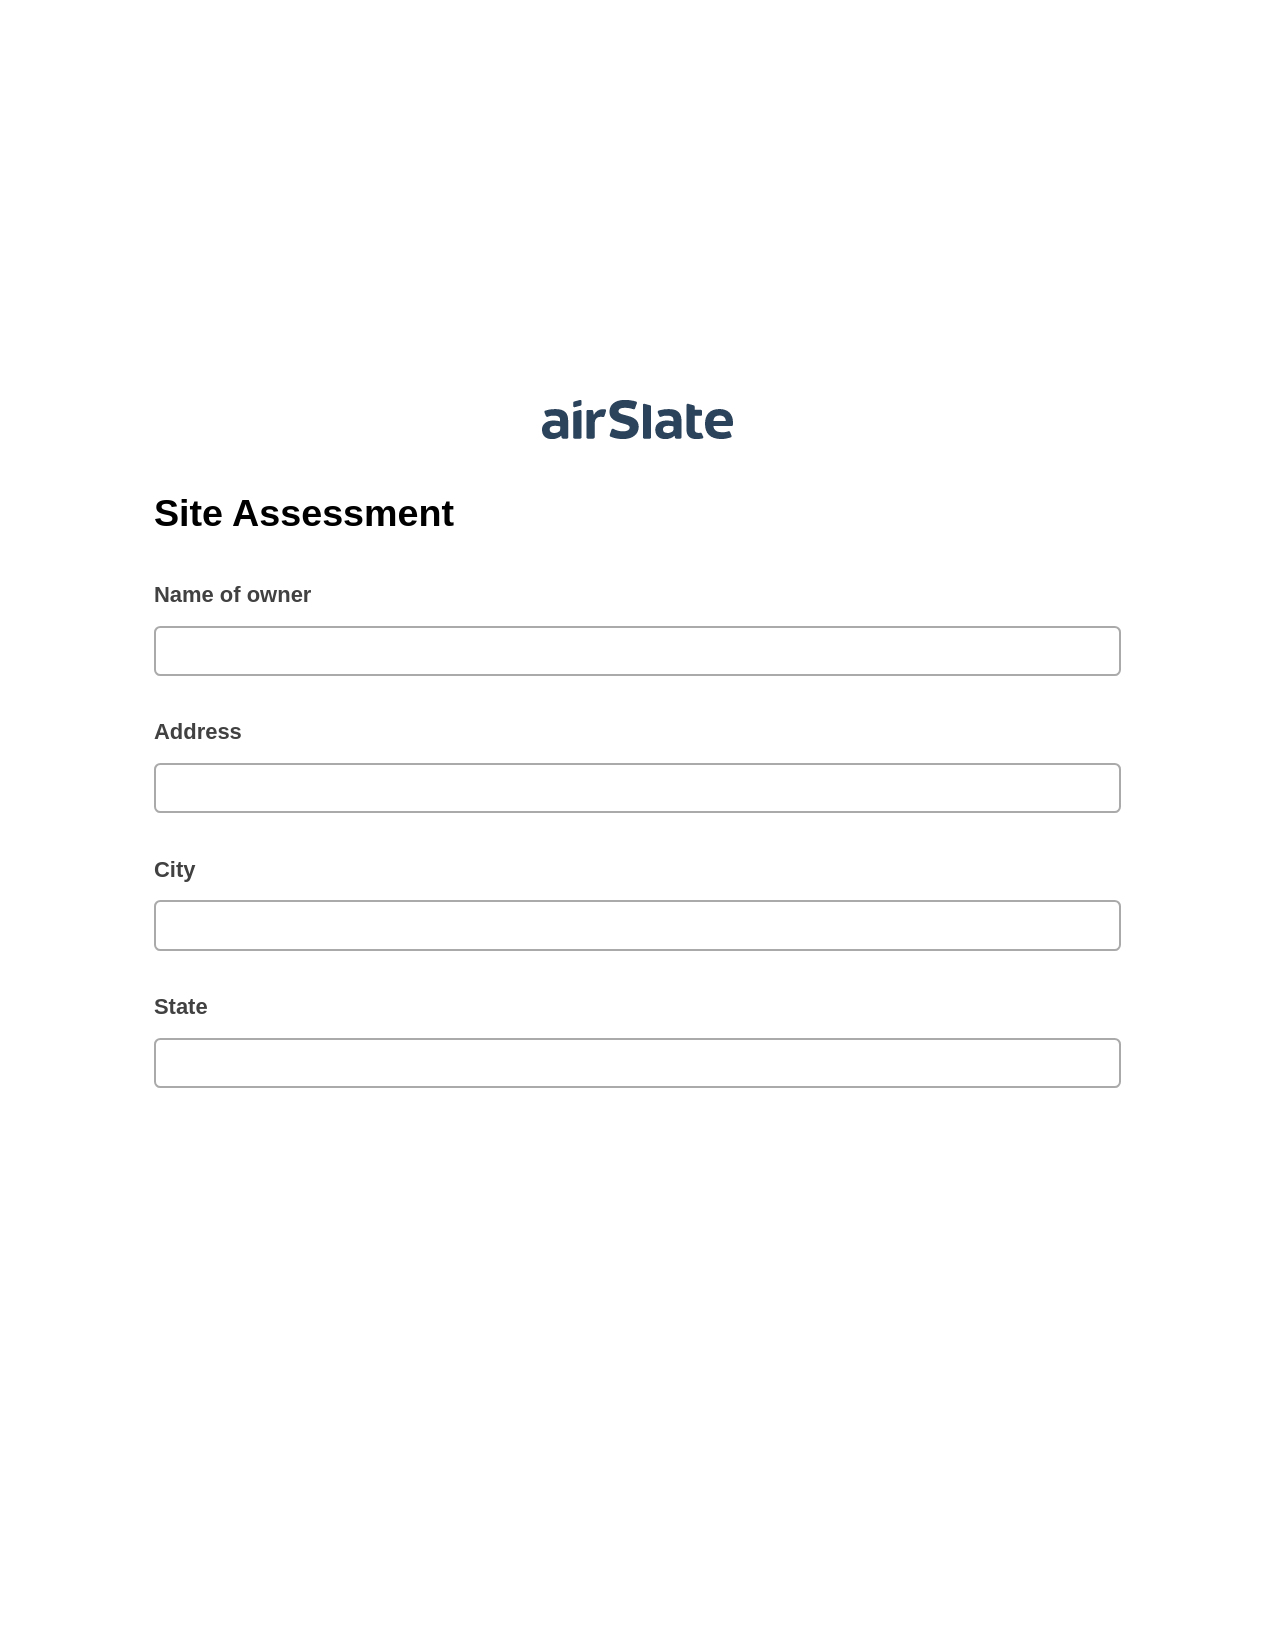 Site Assessment Pre-fill from Salesforce Record Bot, Update MS Dynamics 365 Record Bot, Google Drive Bot